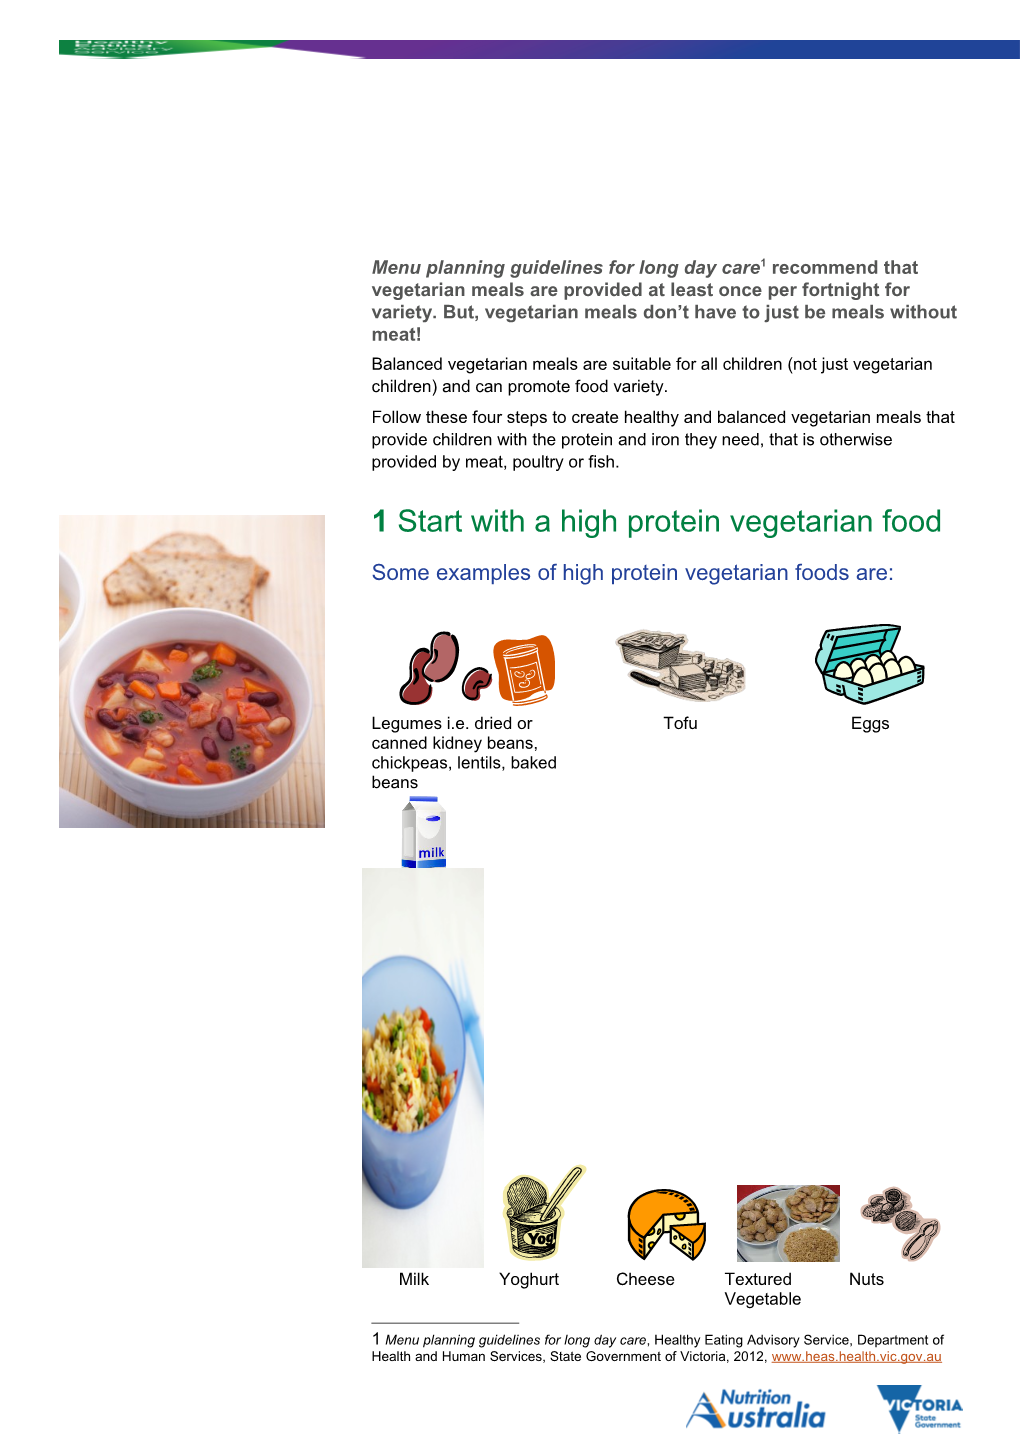 Some Examples of High Protein Vegetarian Foods Are